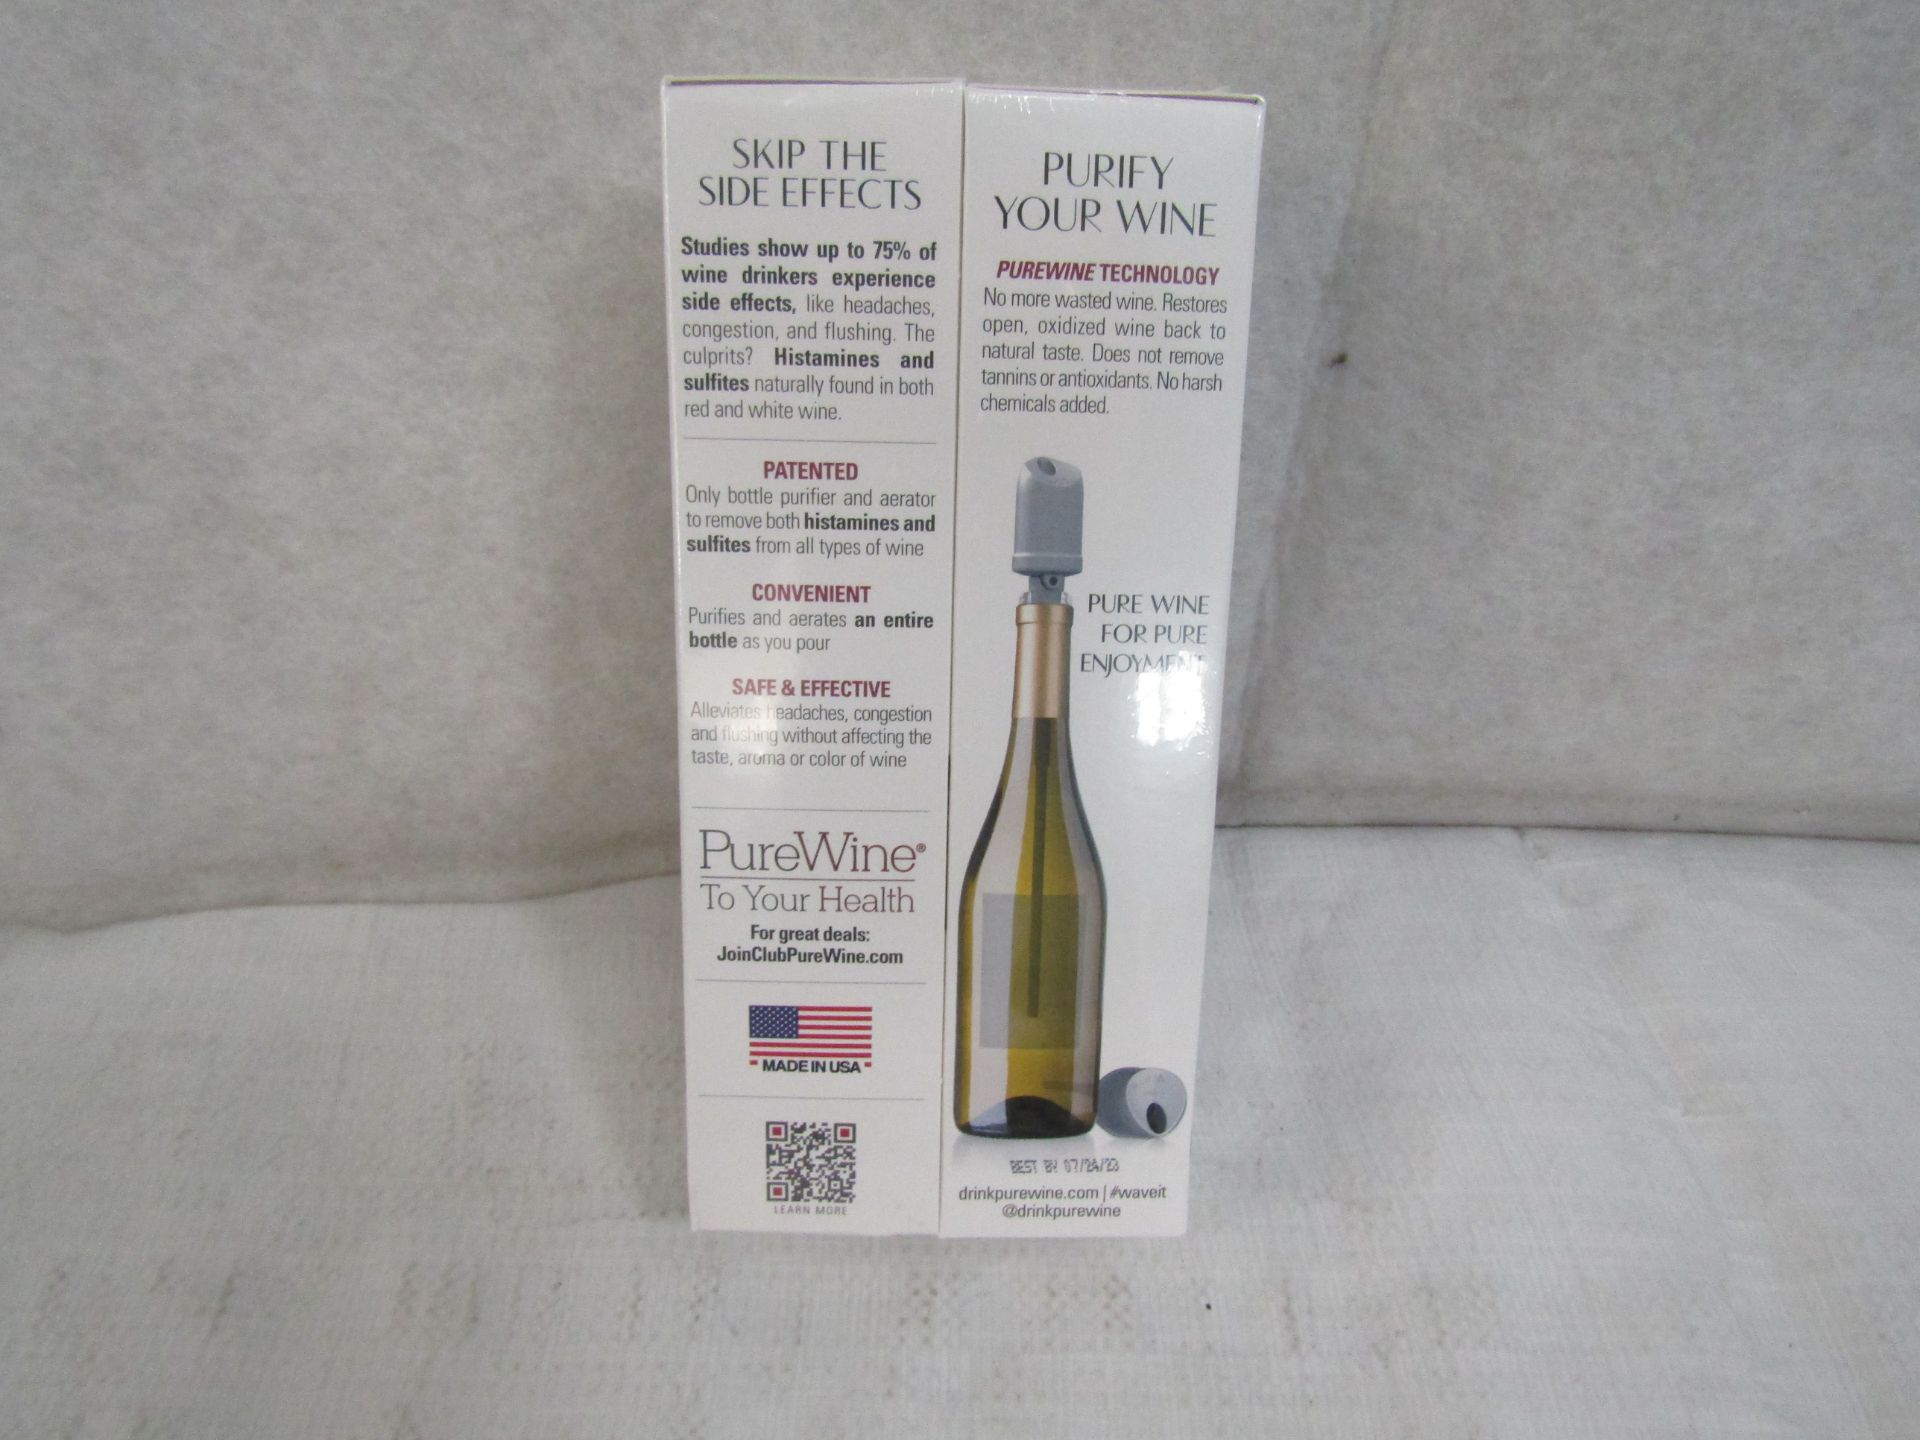 2X TheWave - Wine Purifiier & Aerator - Cures Hangovers. New & Boxed.